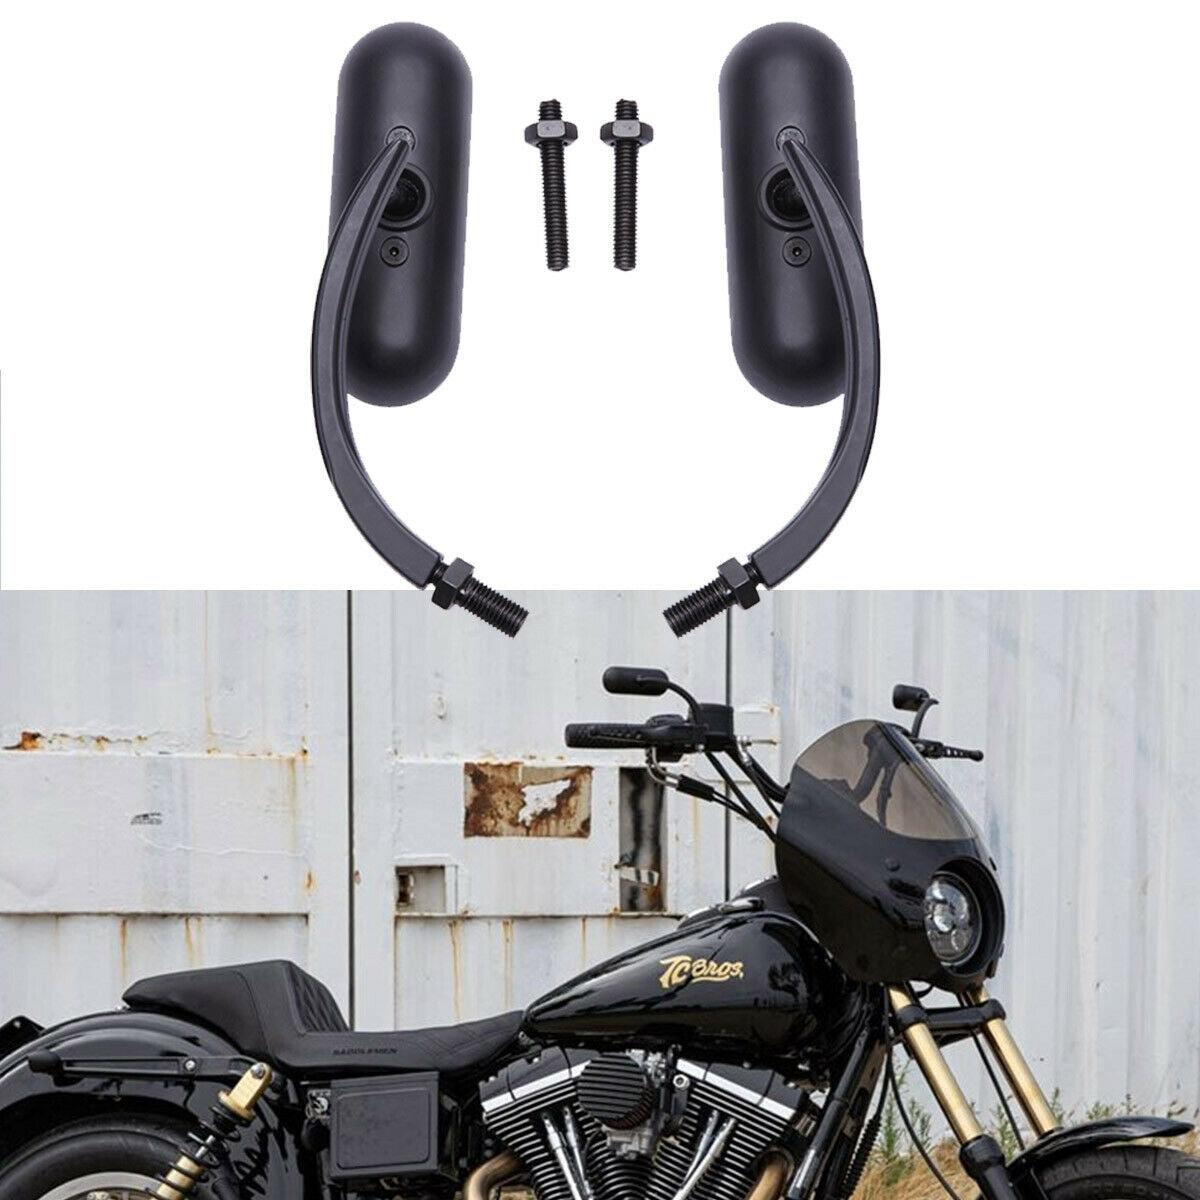 Motorcycle Mini Oval Rear View Mirrors For Harley Davidson Street